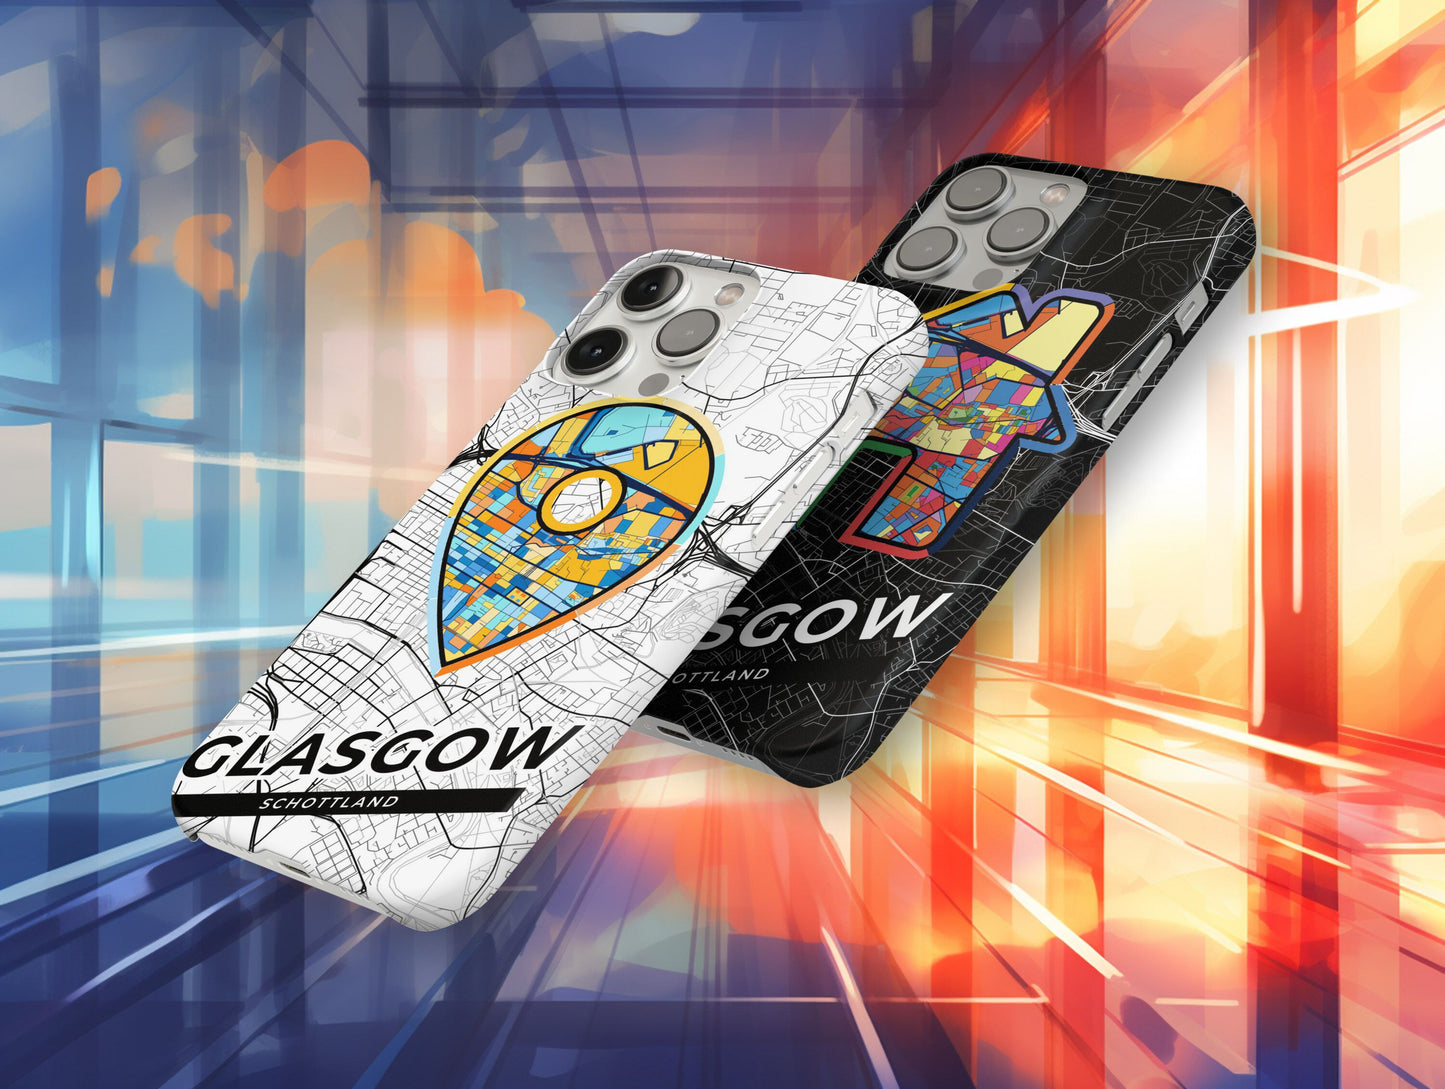 Glasgow Scotland slim phone case with colorful icon. Birthday, wedding or housewarming gift. Couple match cases.